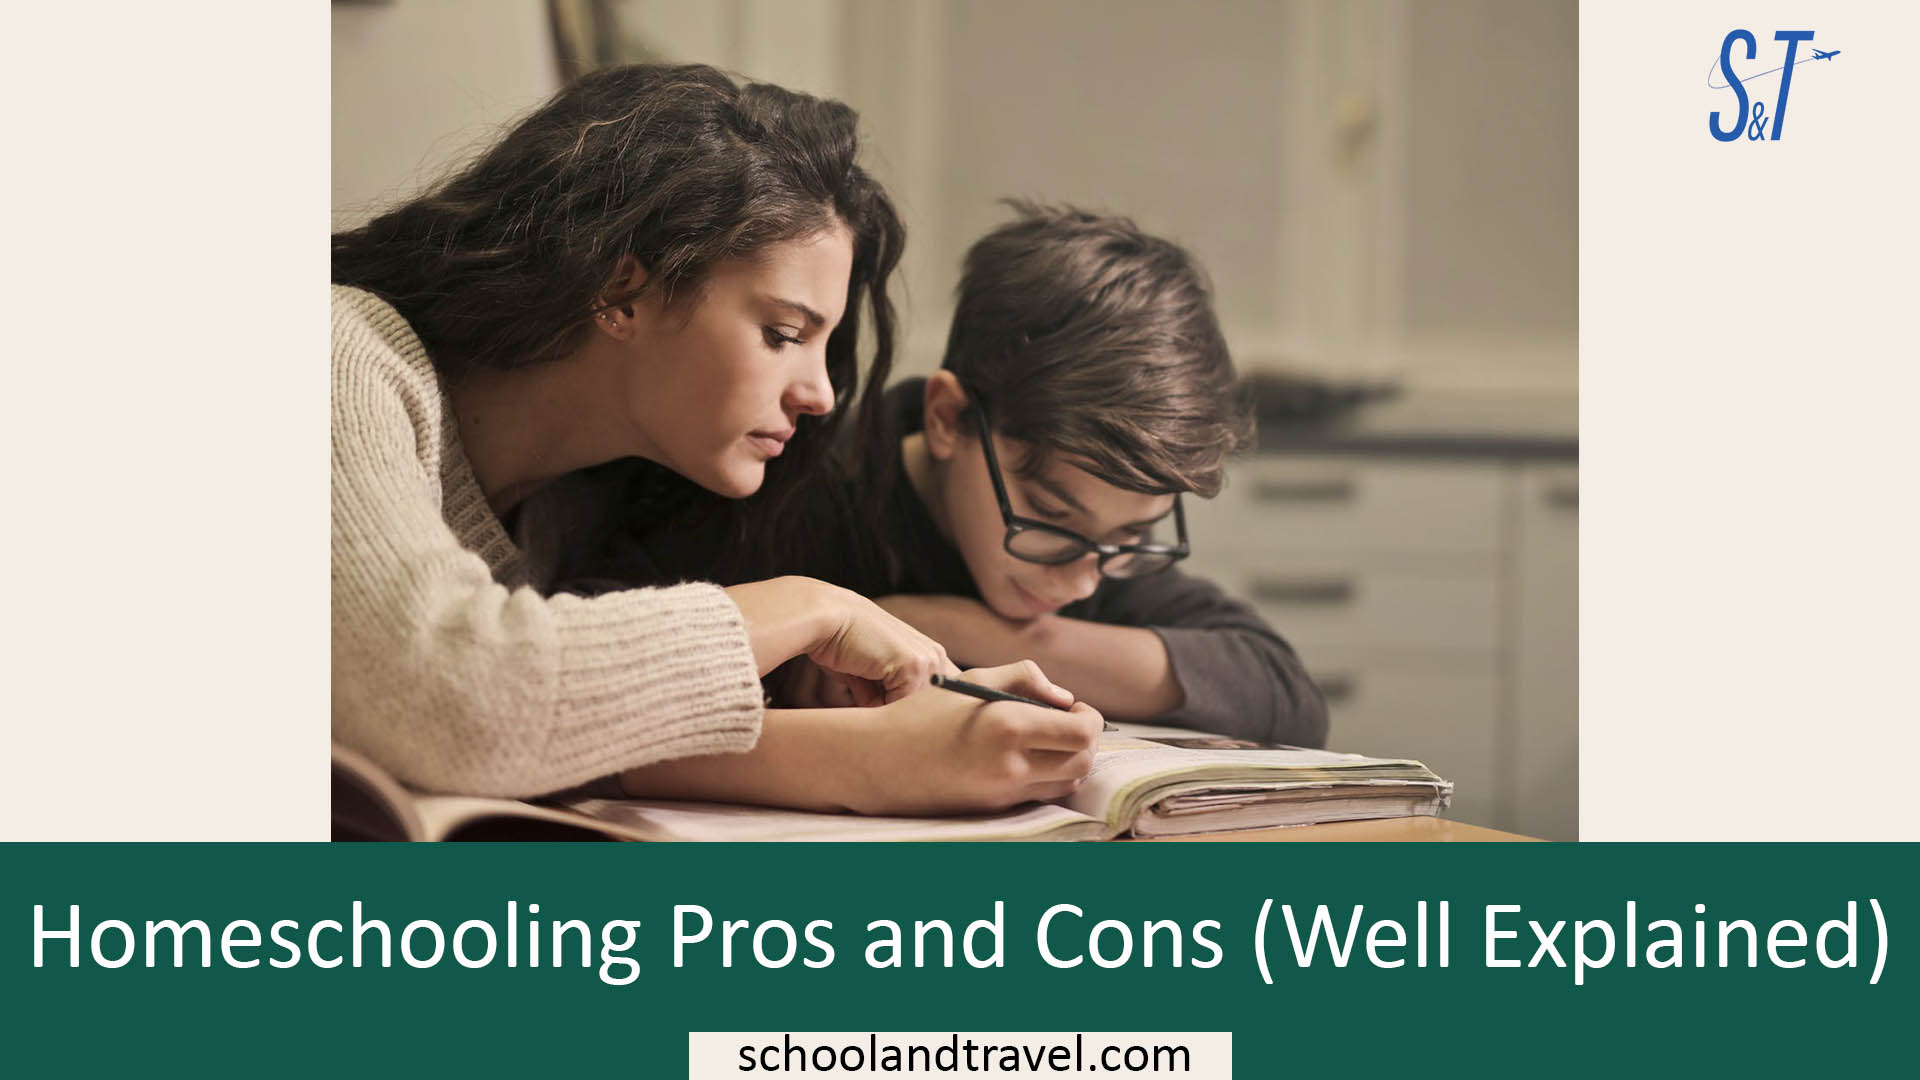 Homeschooling Pros and Cons, Advantages and disadvantages of homeschooling, Why homeschooling is bad